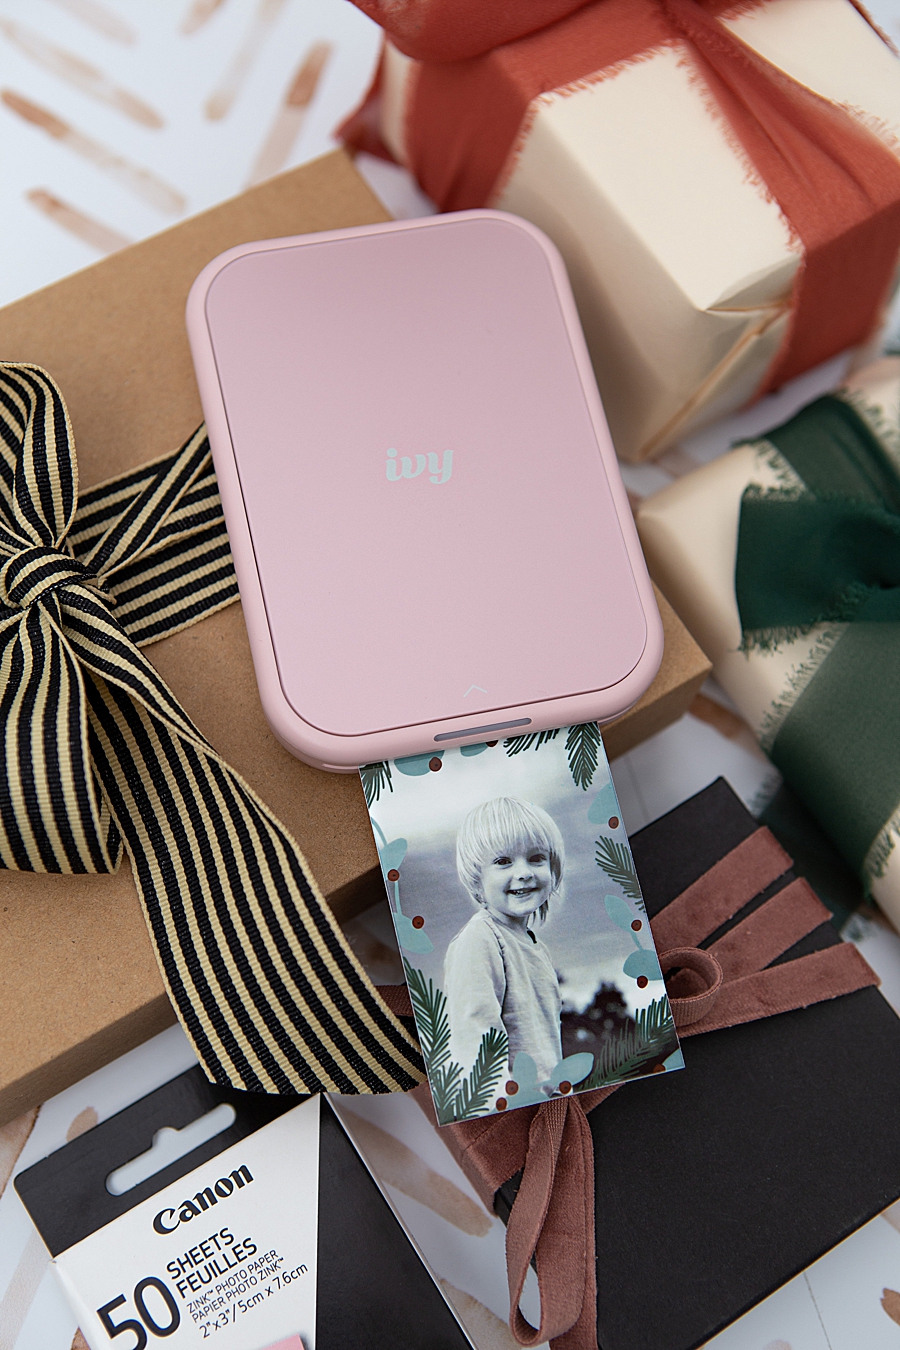 Use your Canon IVY 2 for making photo gift tags for the holidays!